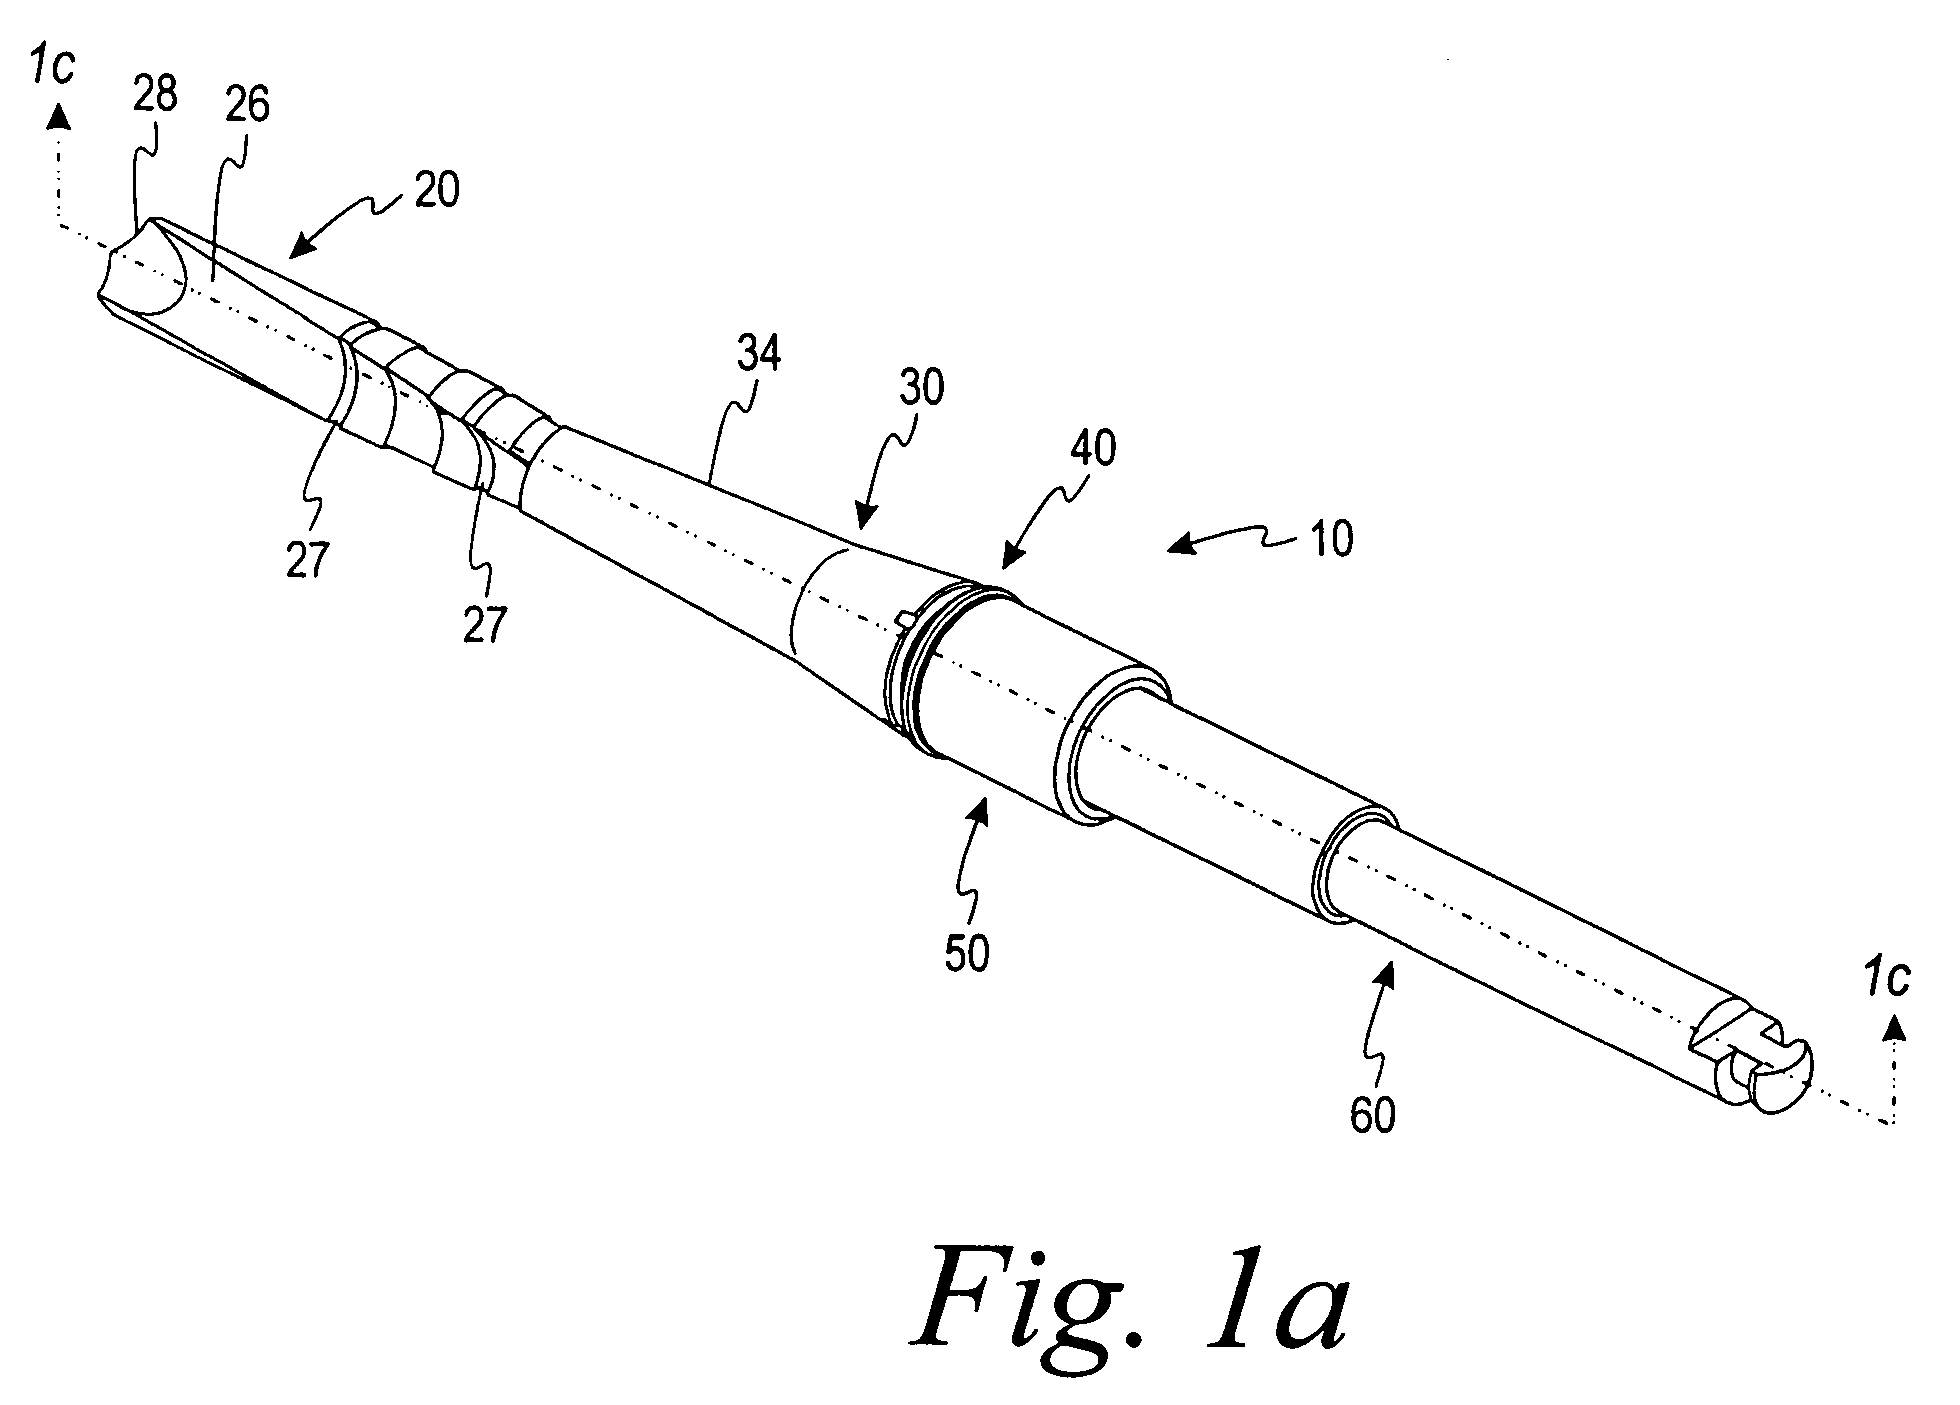 Drill bit assembly for bone tissue including depth limiting feature